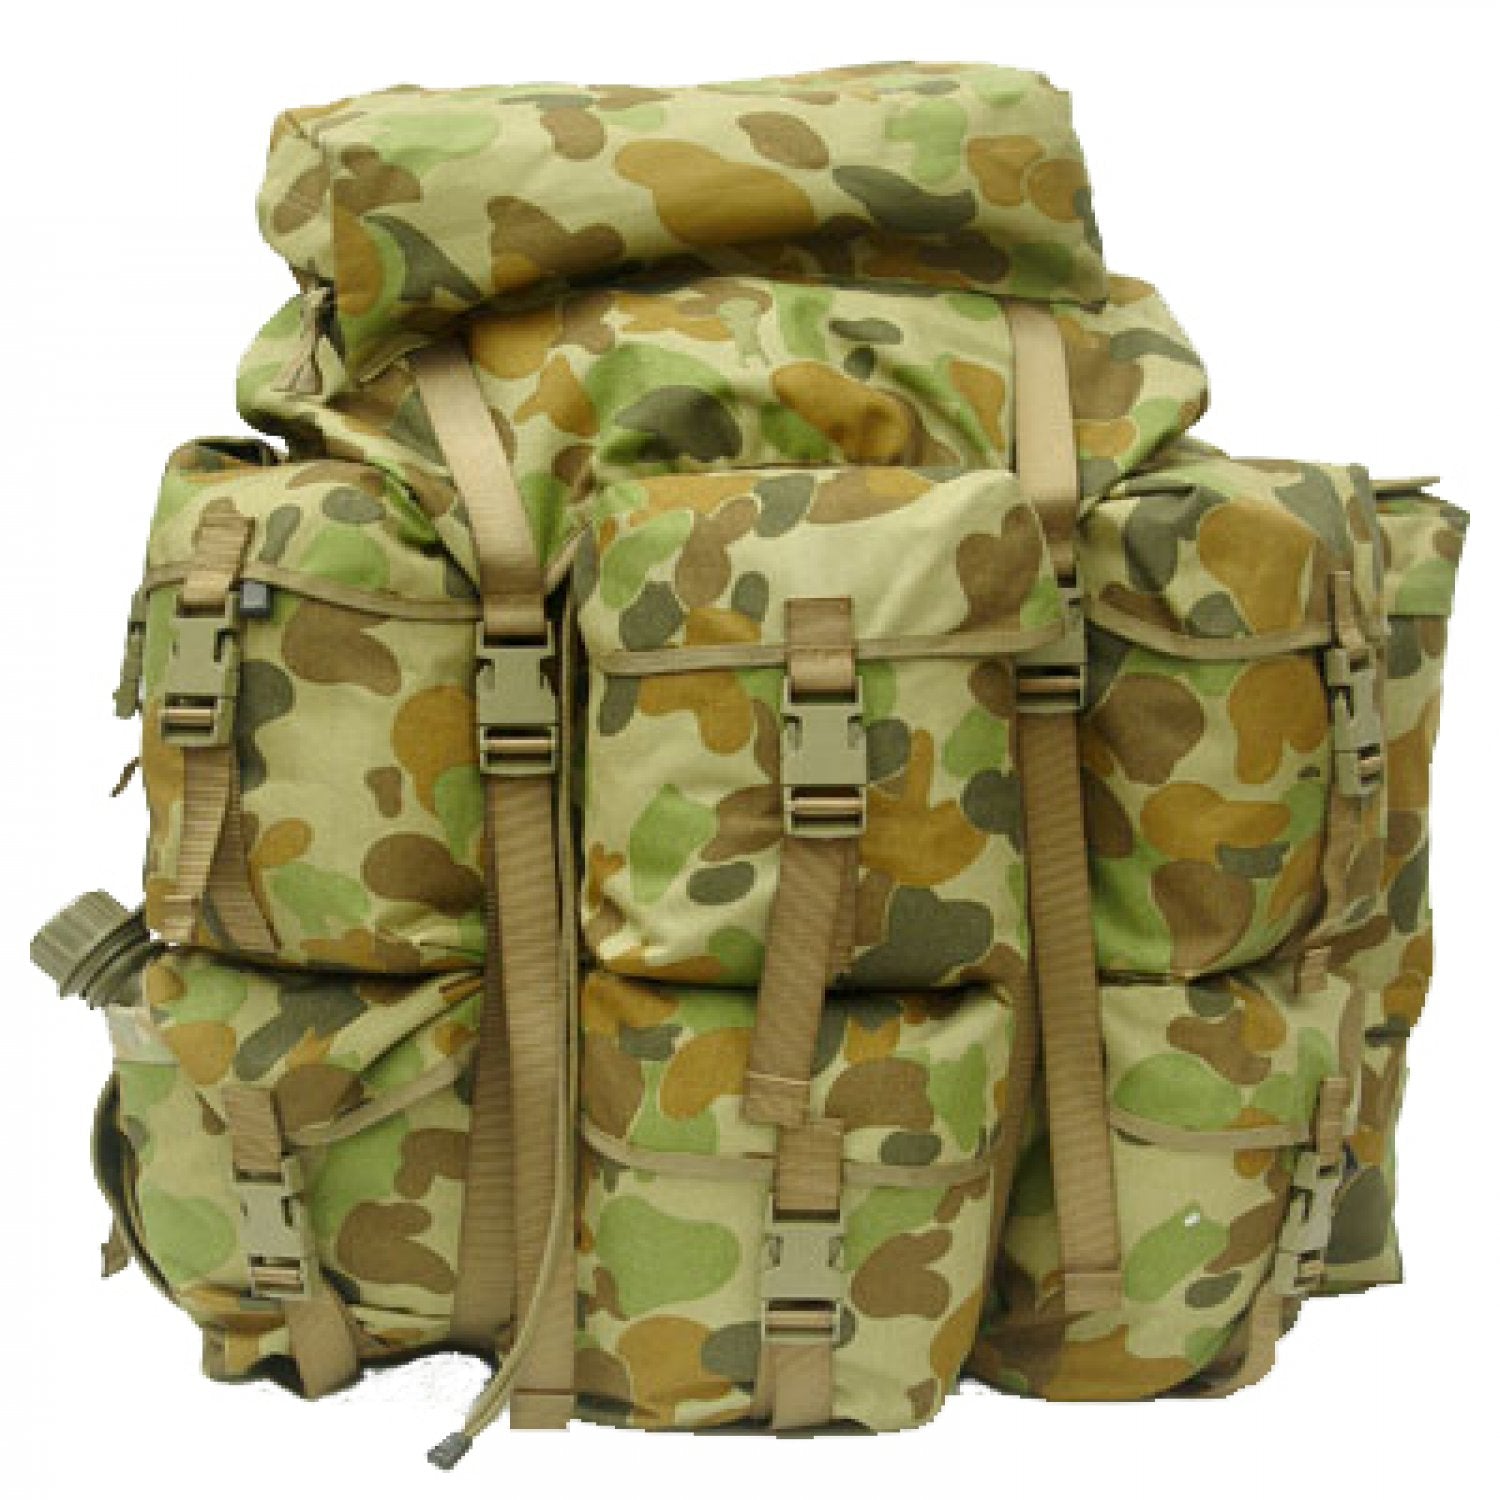 The ultimate outdoor companion! Our XL Alice Pack is a must-have for any camping or trekking adventure. Impressively spacious yet lightweight, it features a durable Auscam or Multicam design, making it perfect for extended stays in the field or on deployment. Make the most of your explorations with maximum comfort and convenience. www.moralepatches.com.au